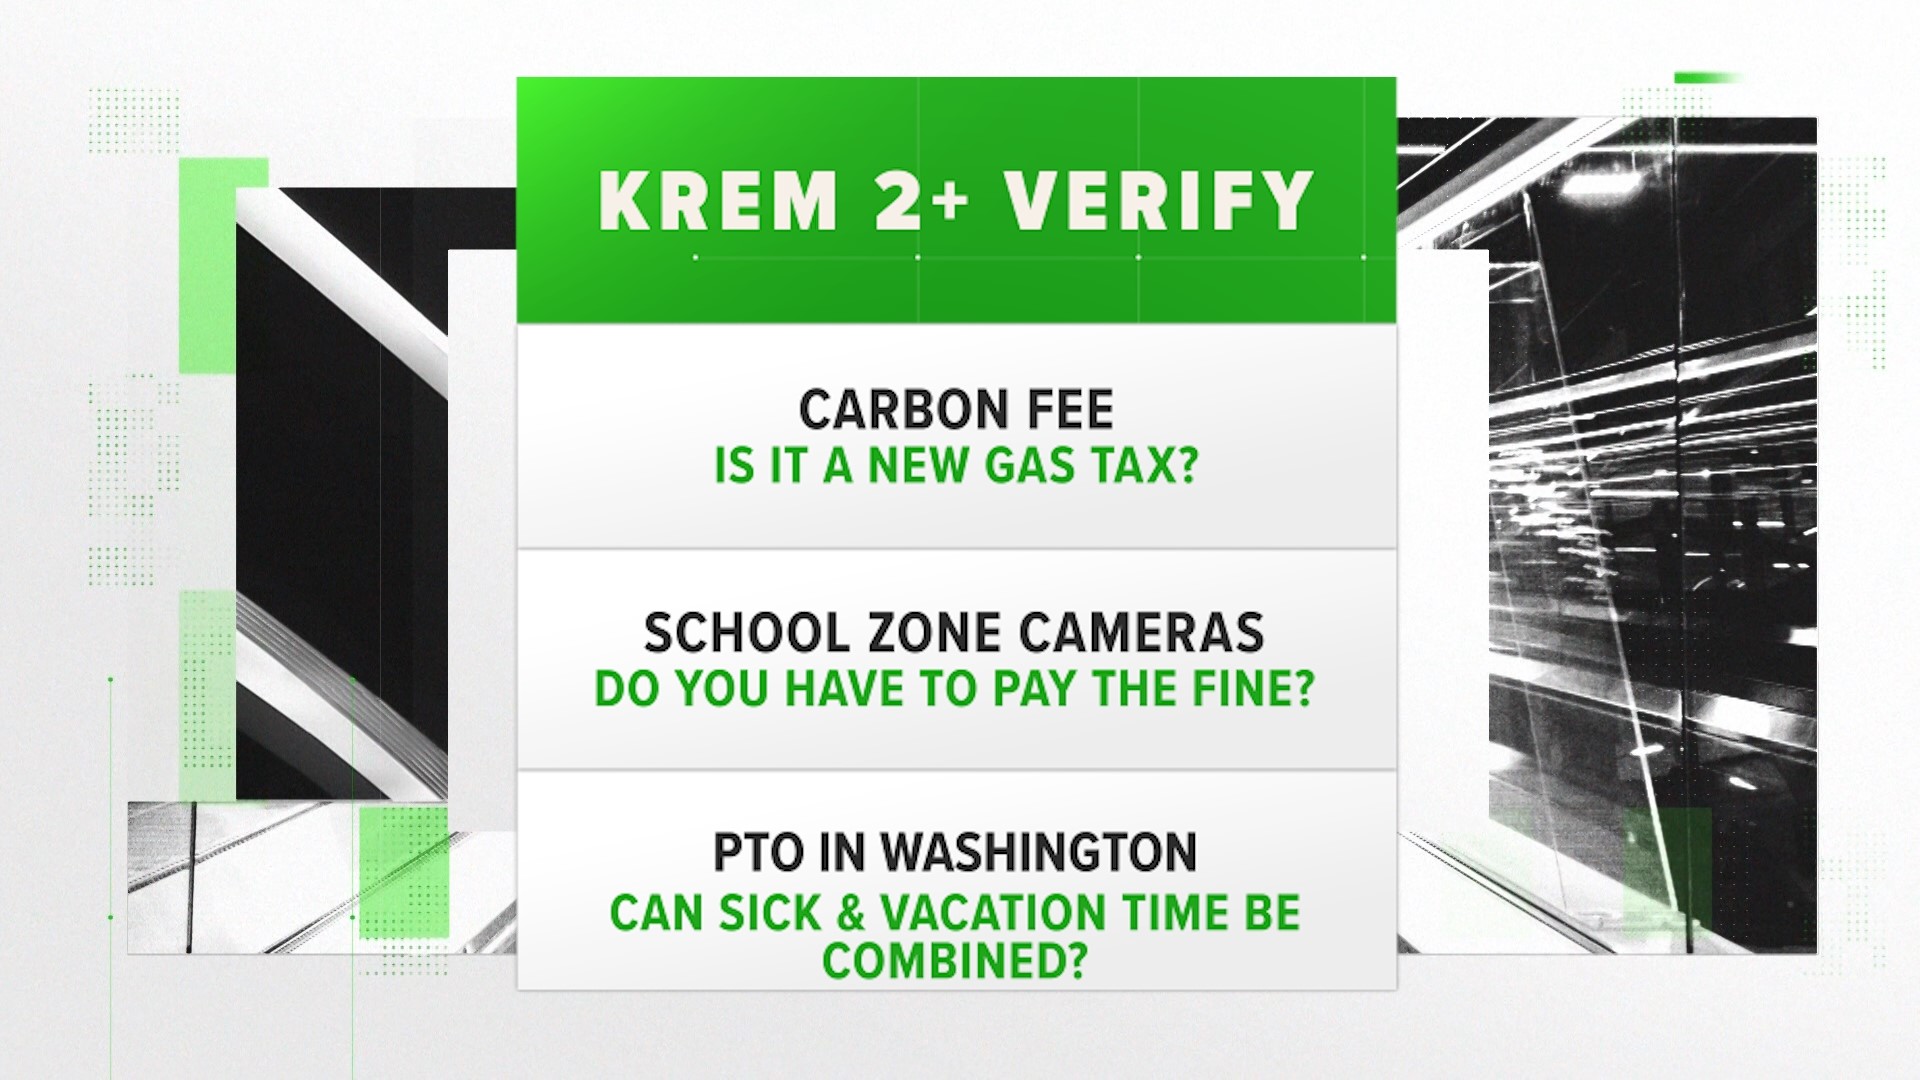 Did Washington add a new gas tax in 2023, do you have to pay school zone camera tickets, and are PTO programs combining sick and vacation time legal in Washington?